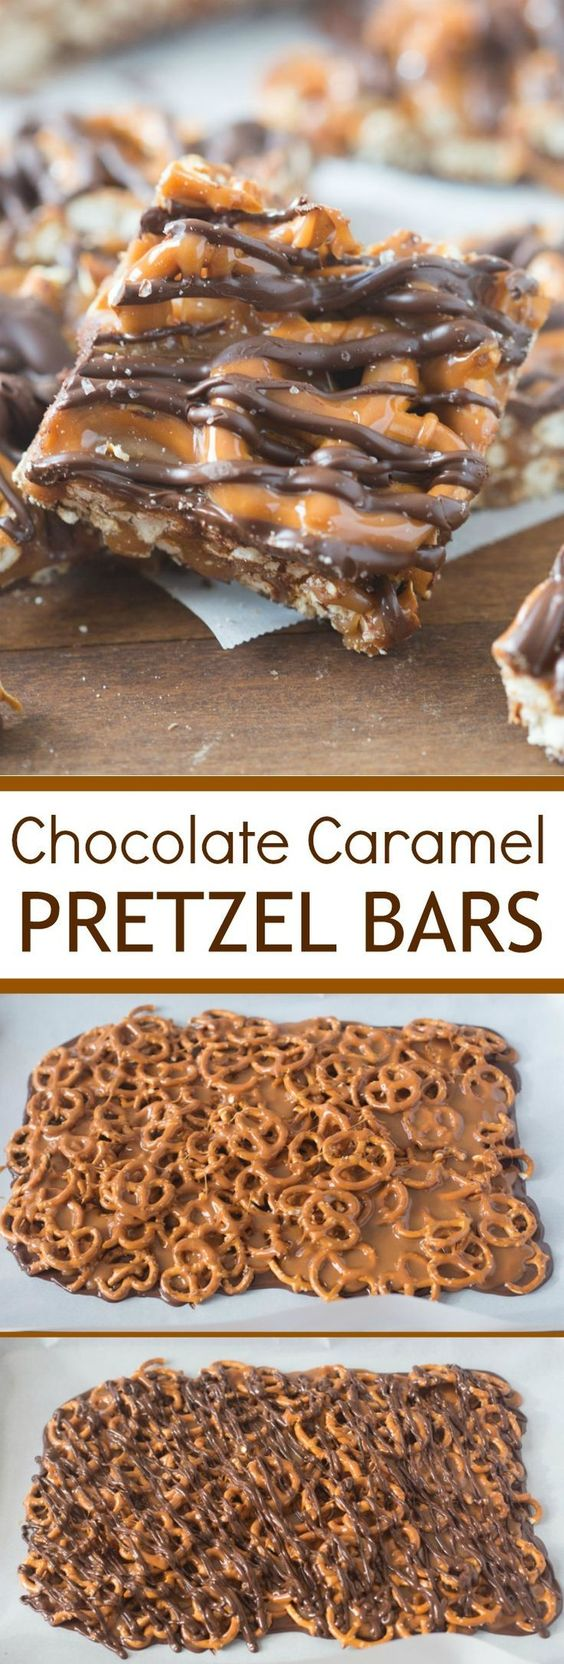 The Best Easy Desserts Bars Recipes – Favorite New Plus Classic Simple Bar Cookies and Quick Big Batch Party Treats Bars for a Crowd -   19 desserts sweet treats ideas